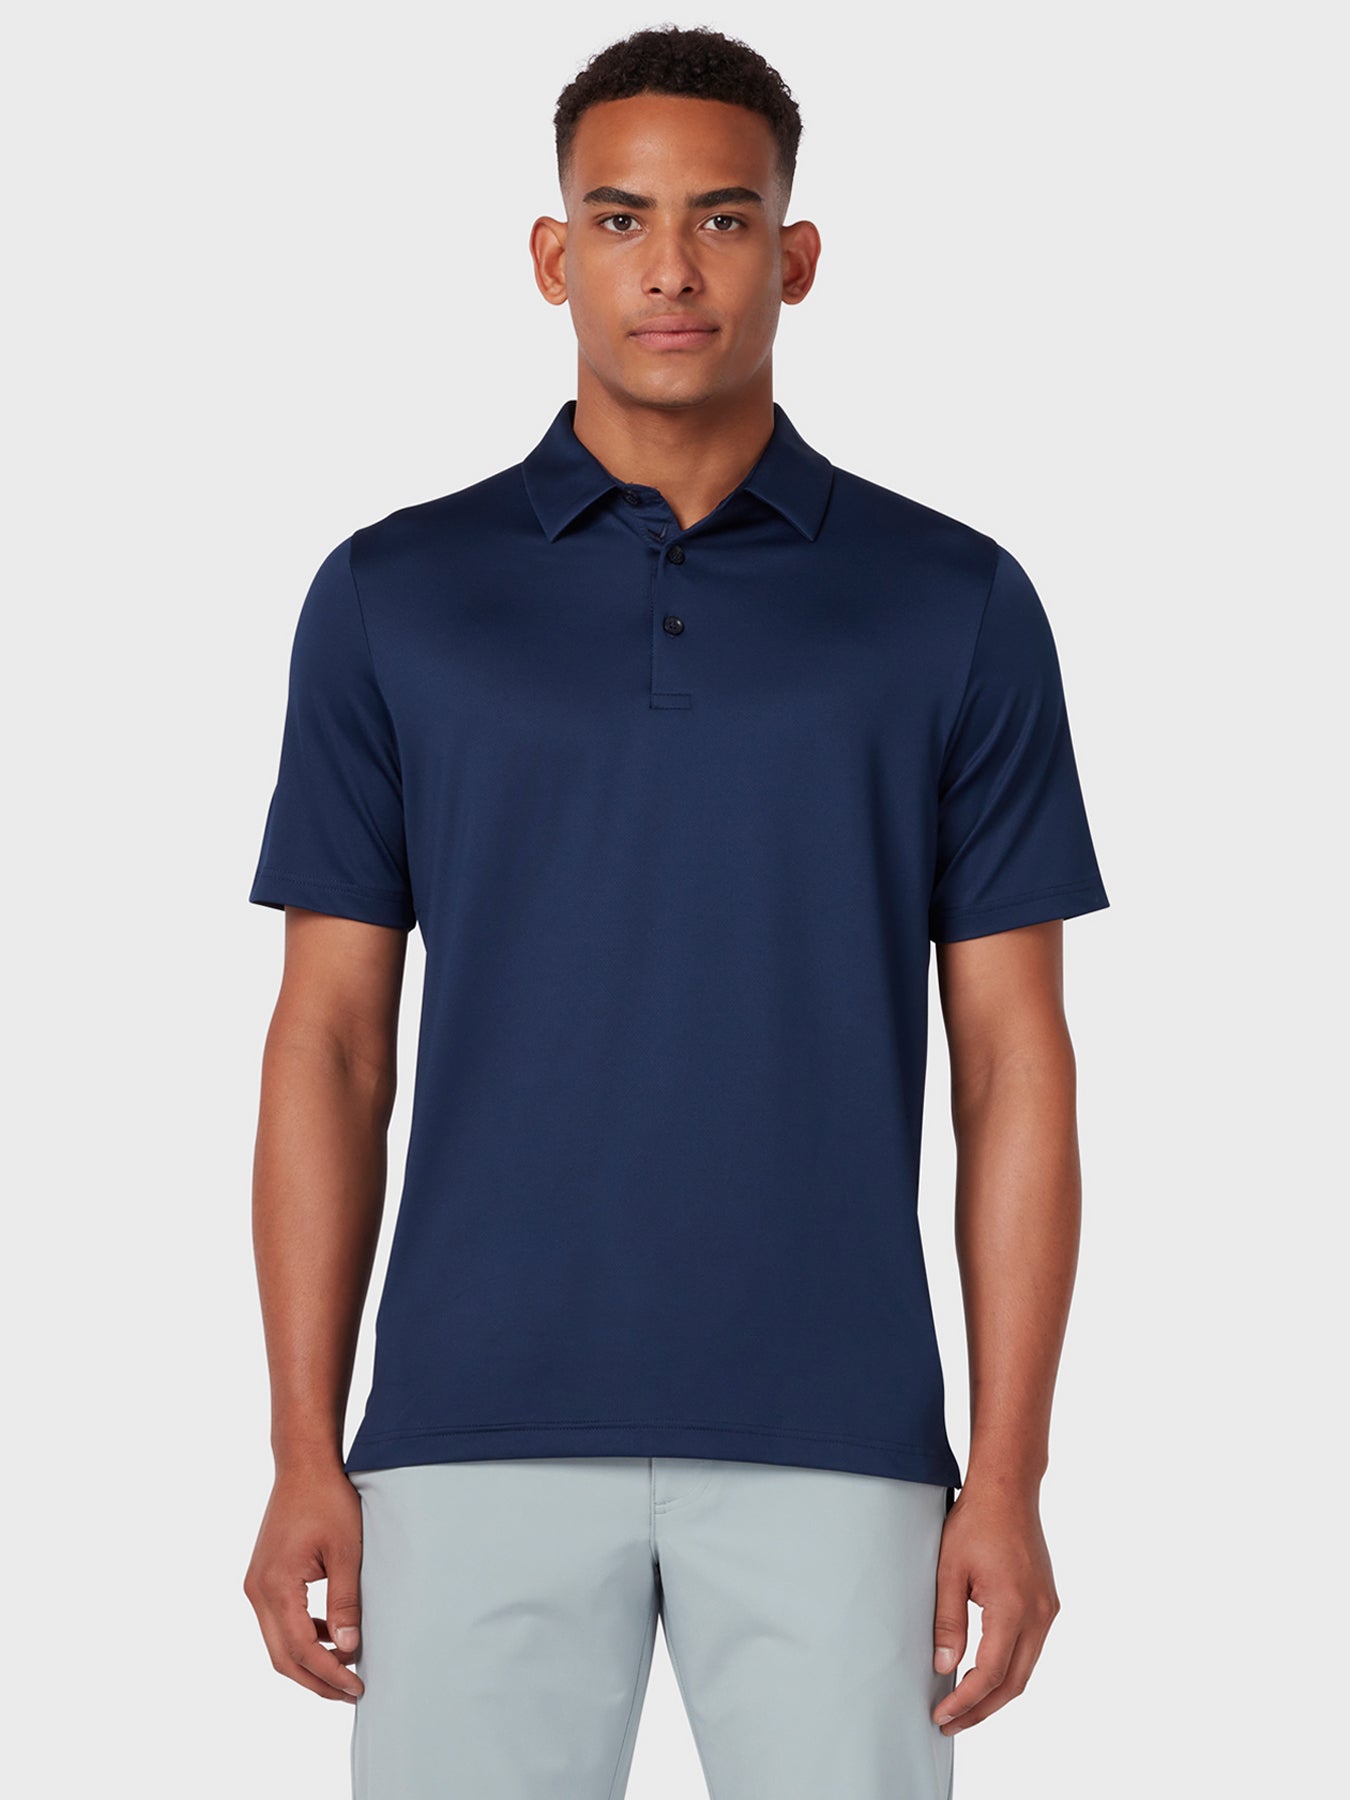 View Swing Tech Tour Polo In Peacoat Peacoat 4XL information